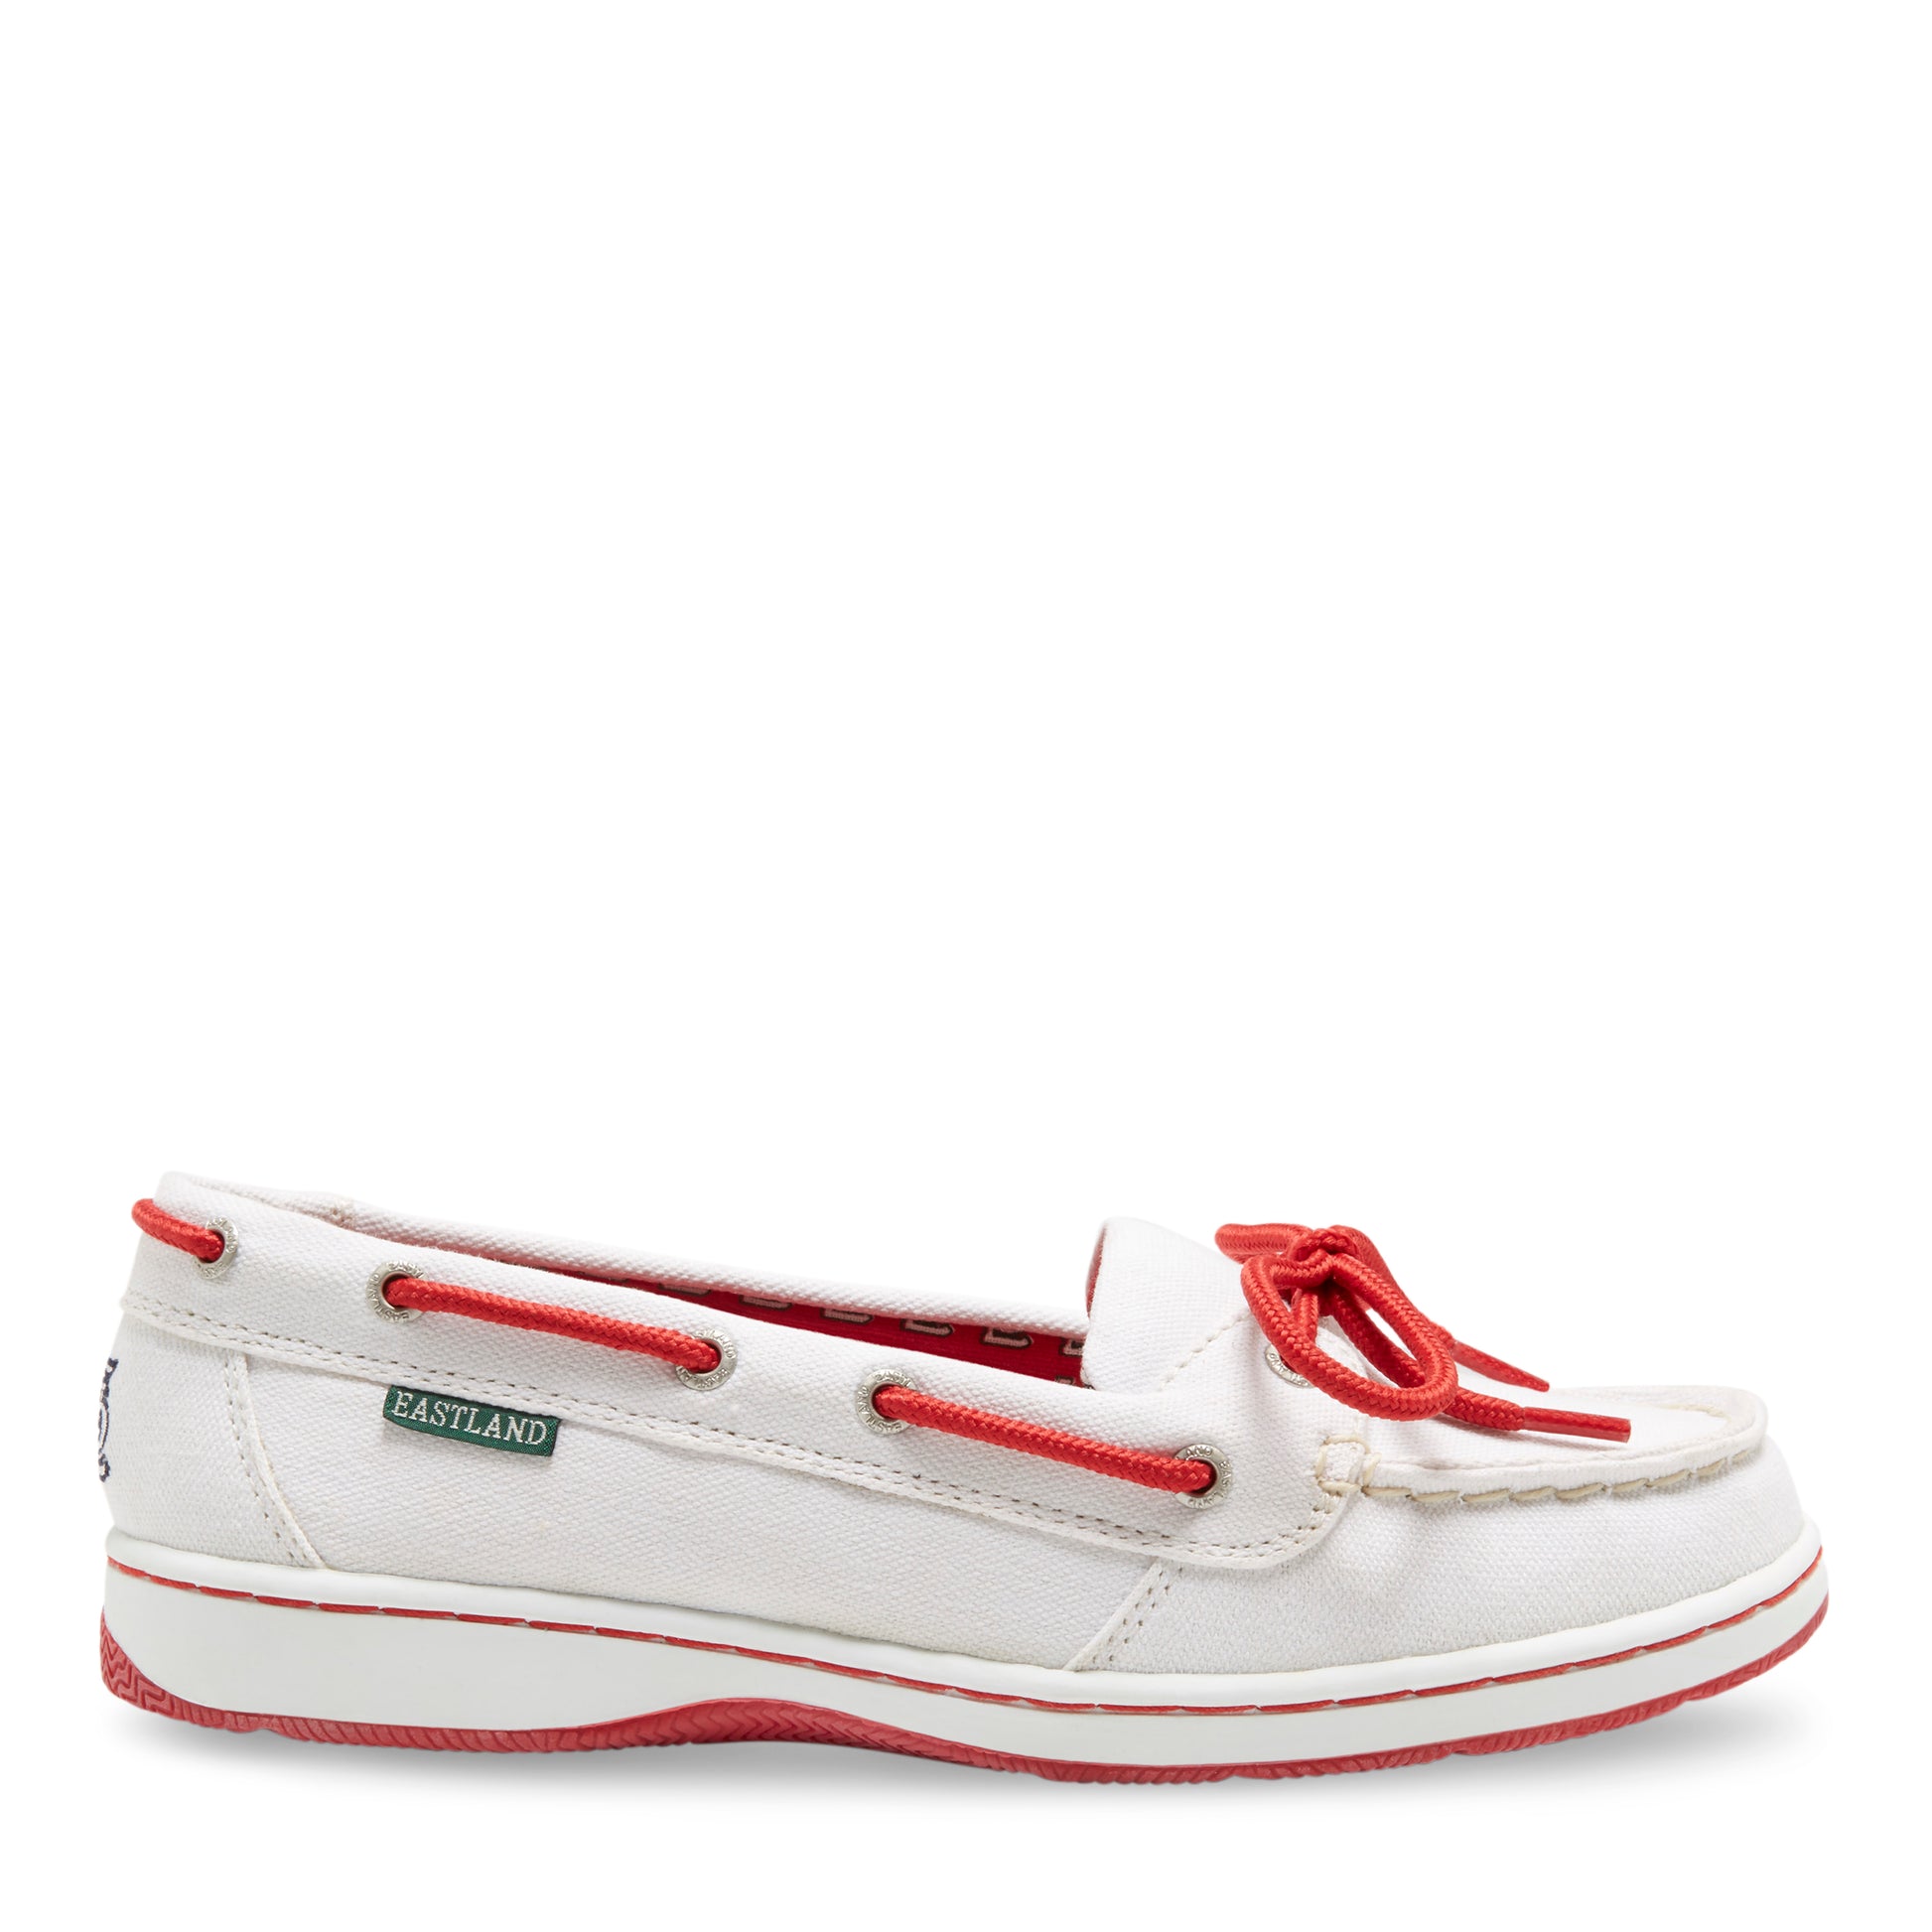 St. Louis Cardinals Eastland Women's Sunset Boat Shoes - Red